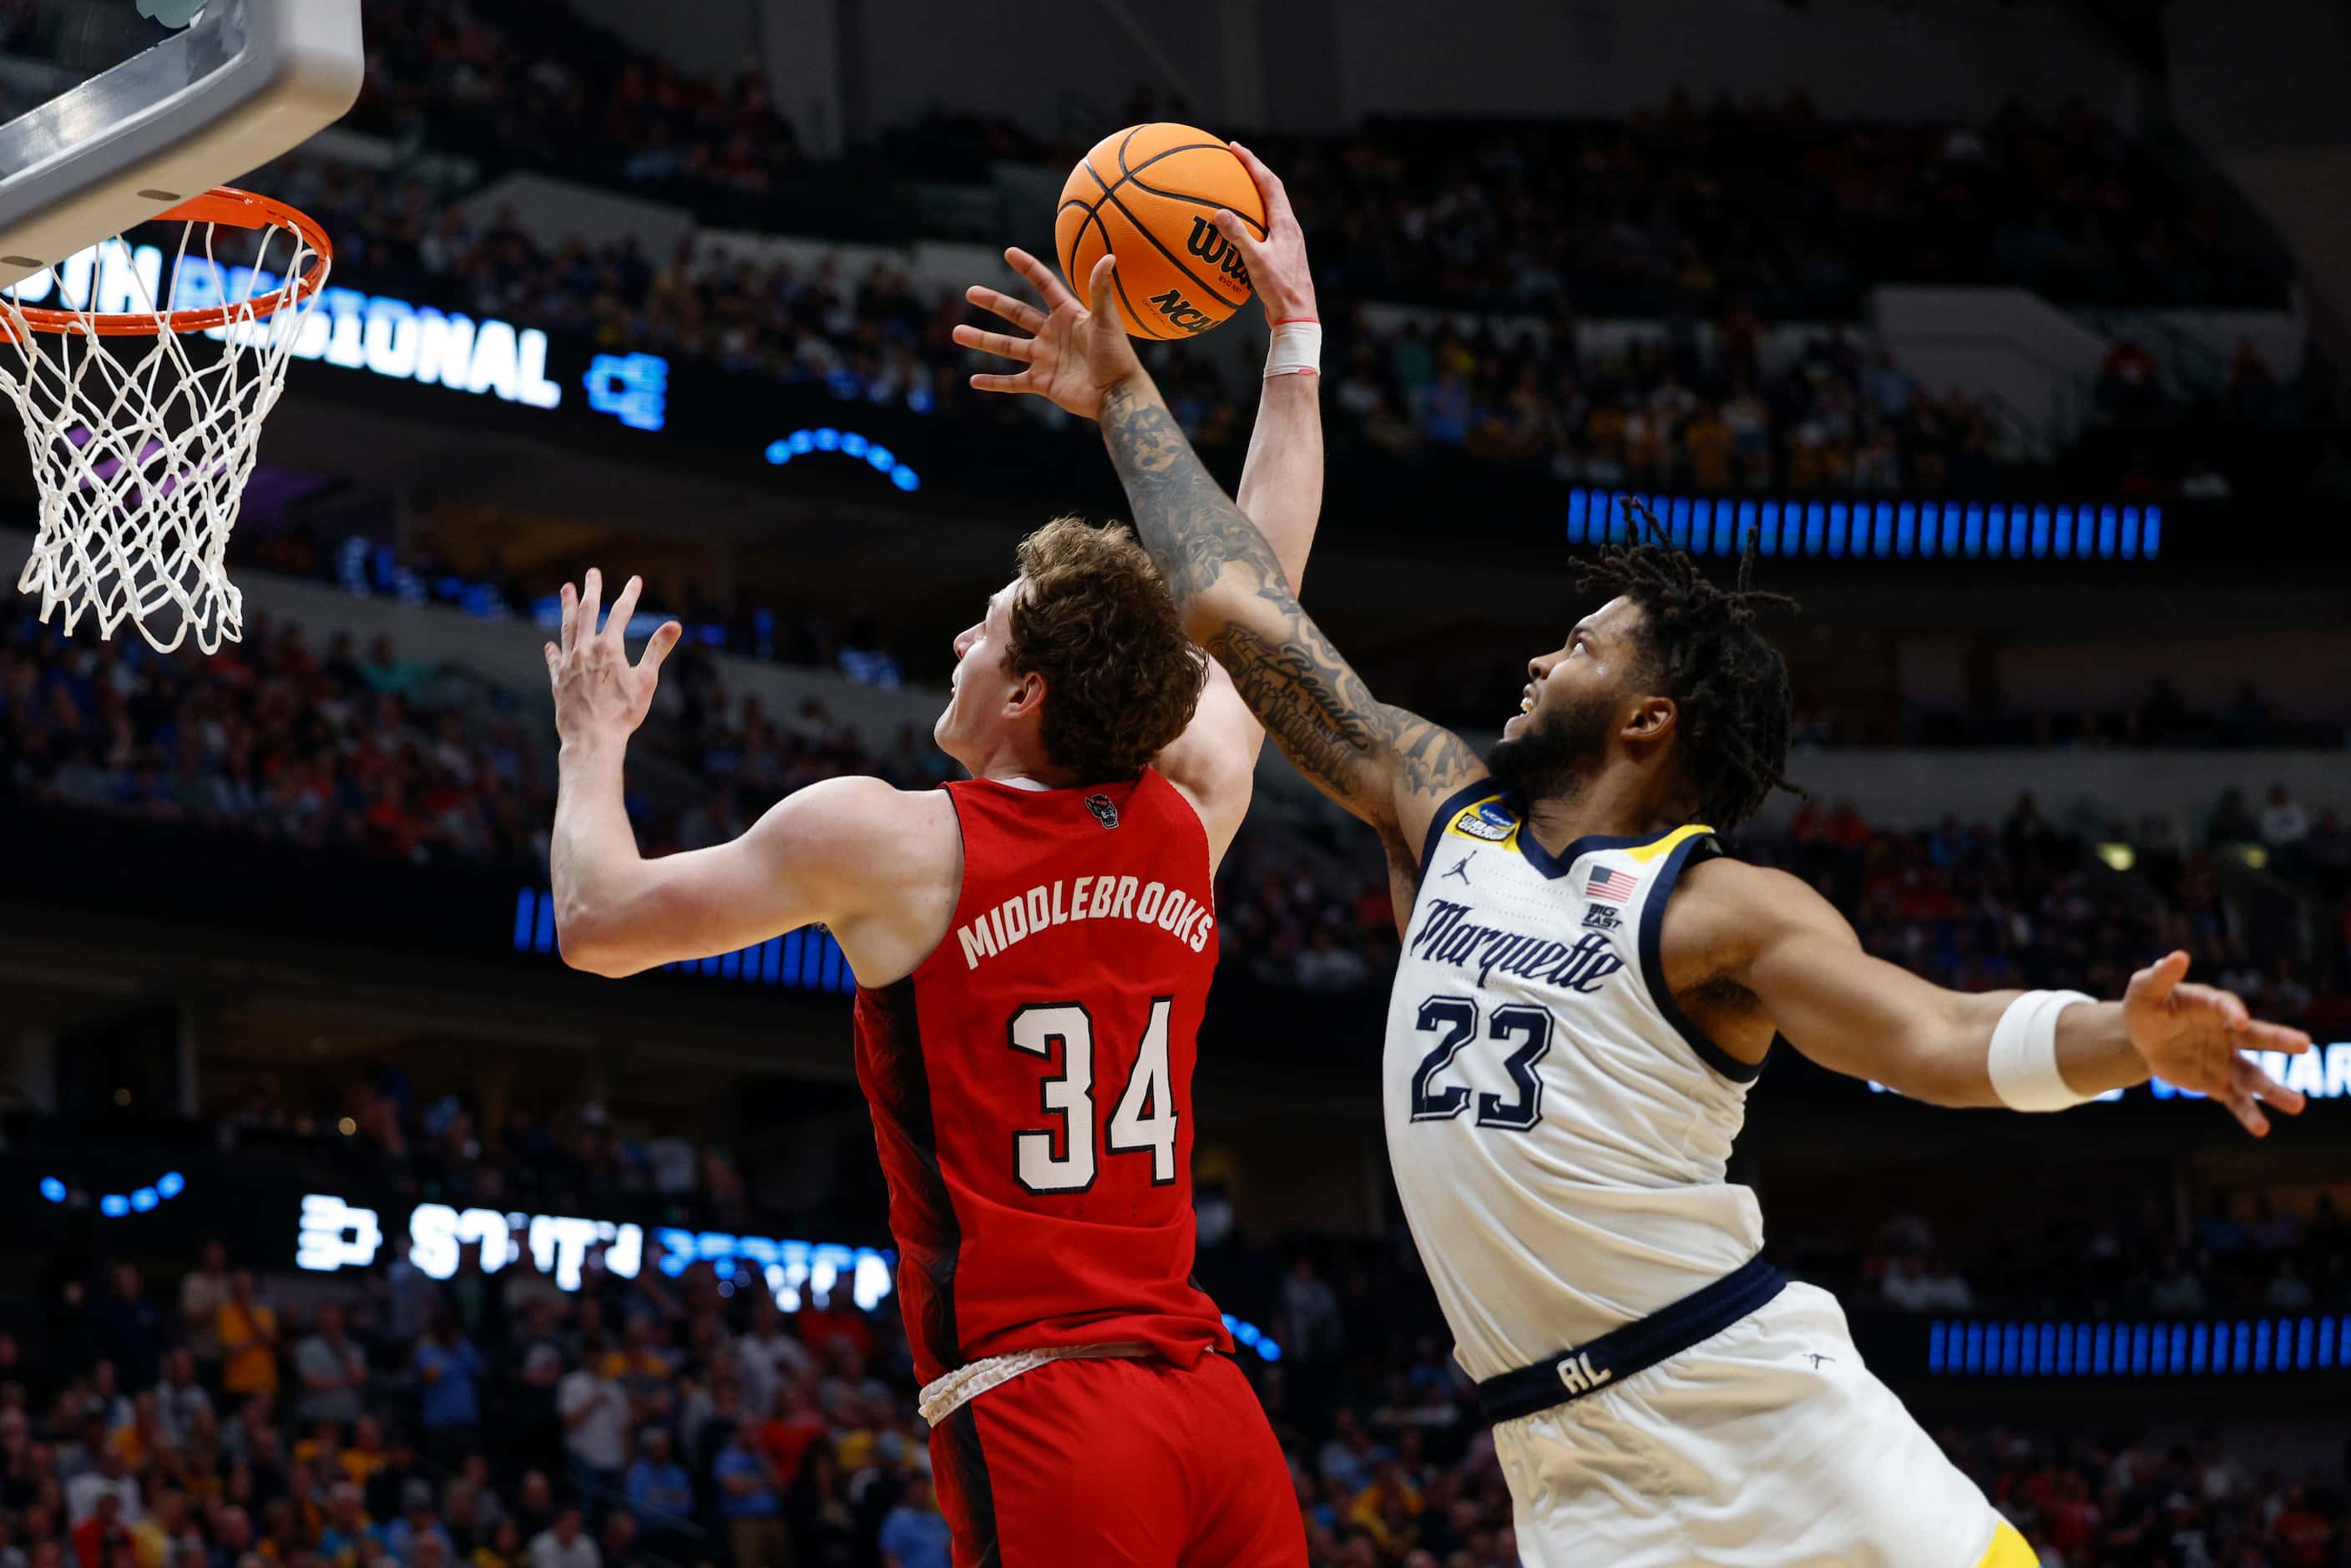 North Carolina State forward Ben Middlebrooks (34) dunks the ball ahead of Marquette forward...